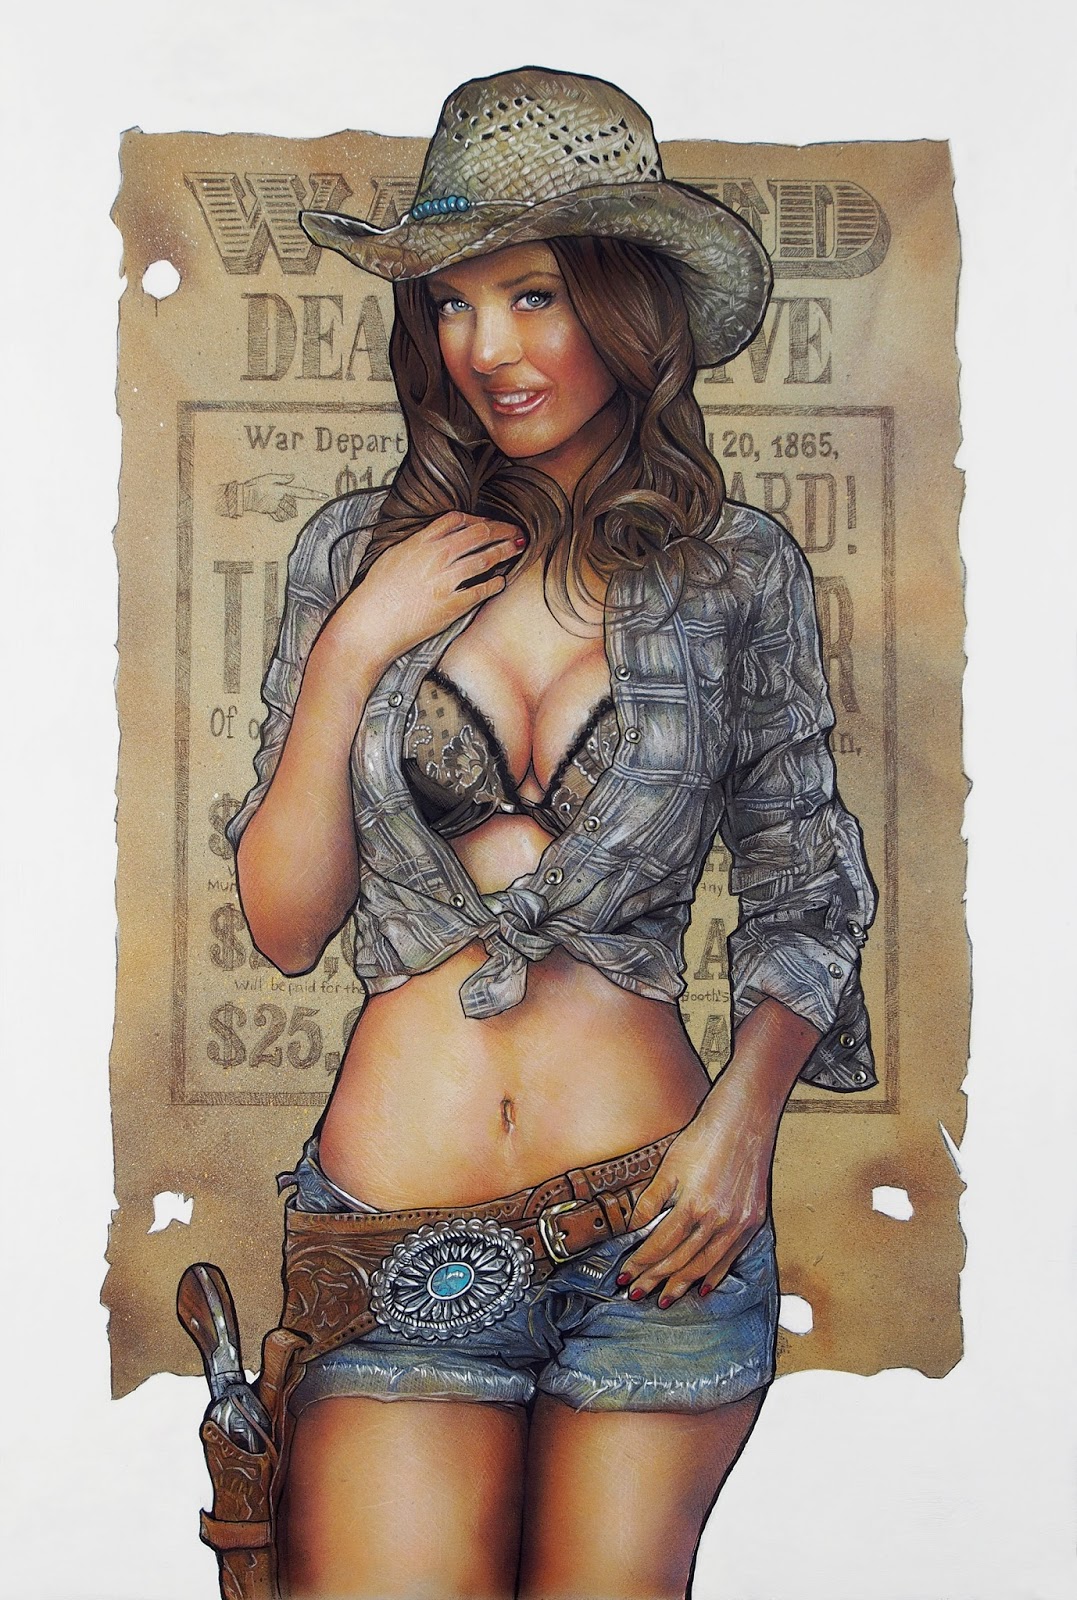 Country Western - Cow Girl Traditional Pinup Girl Commission.